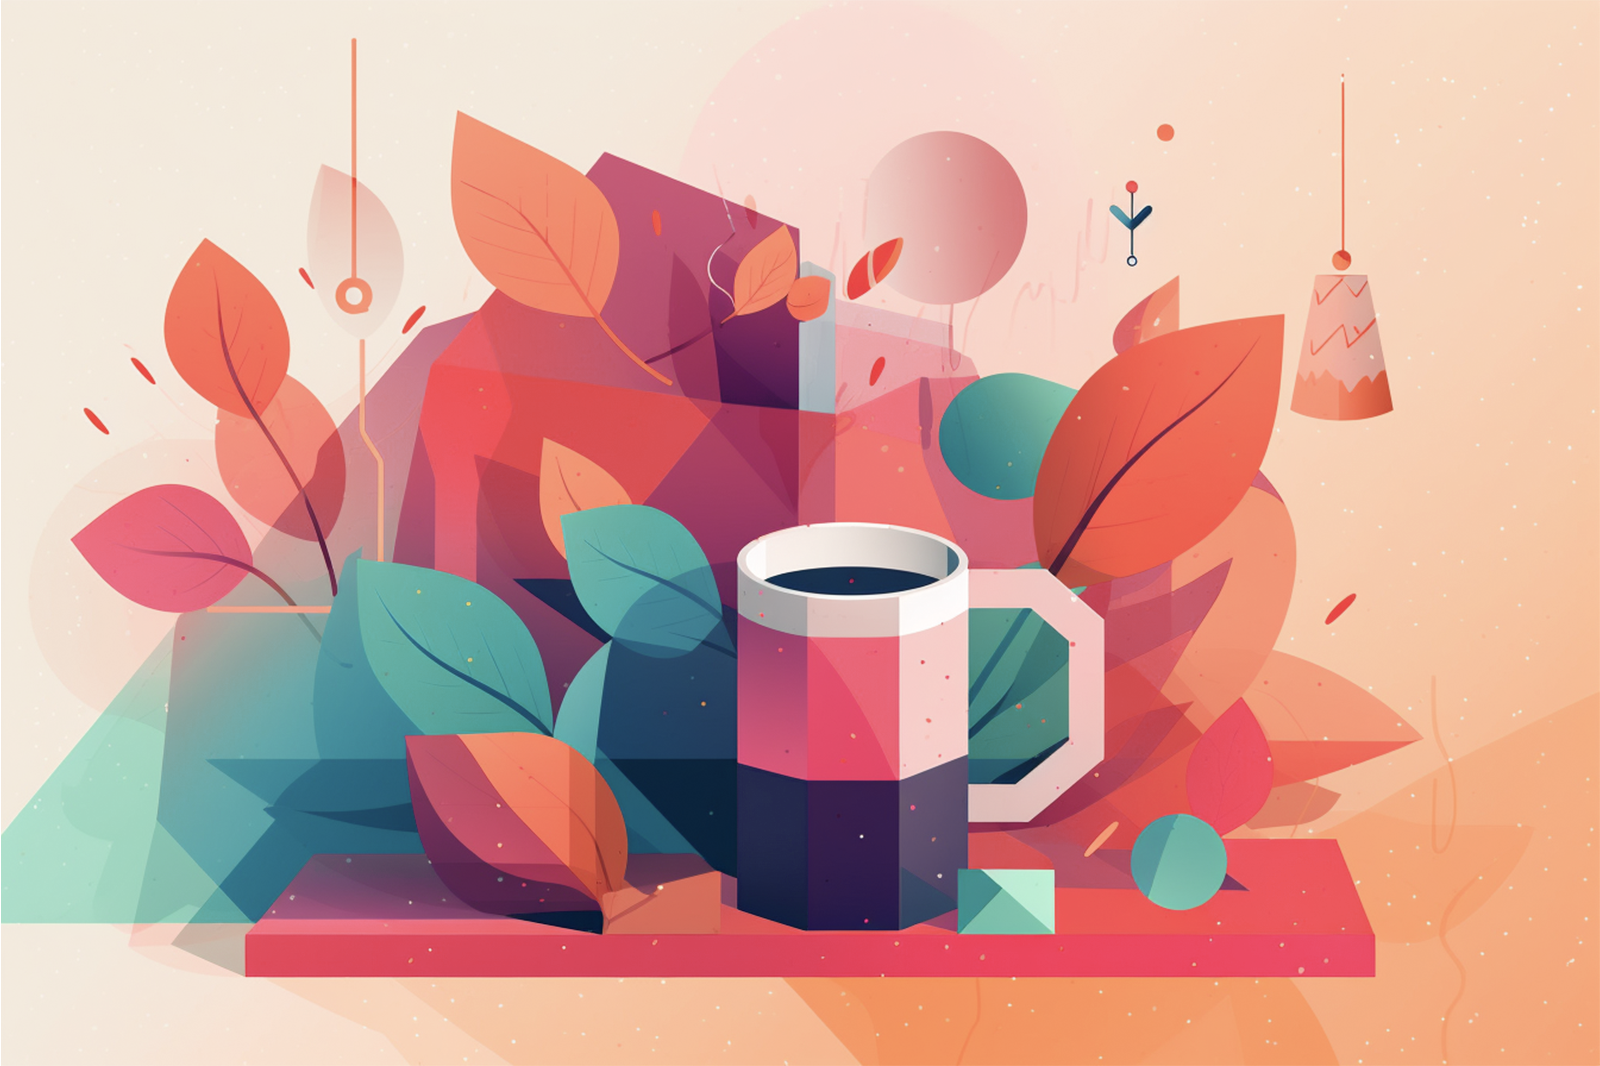 Vibrant multicolored coffee mug on red surface with coffee, surrounded by colorful leaves against light peach backdrop